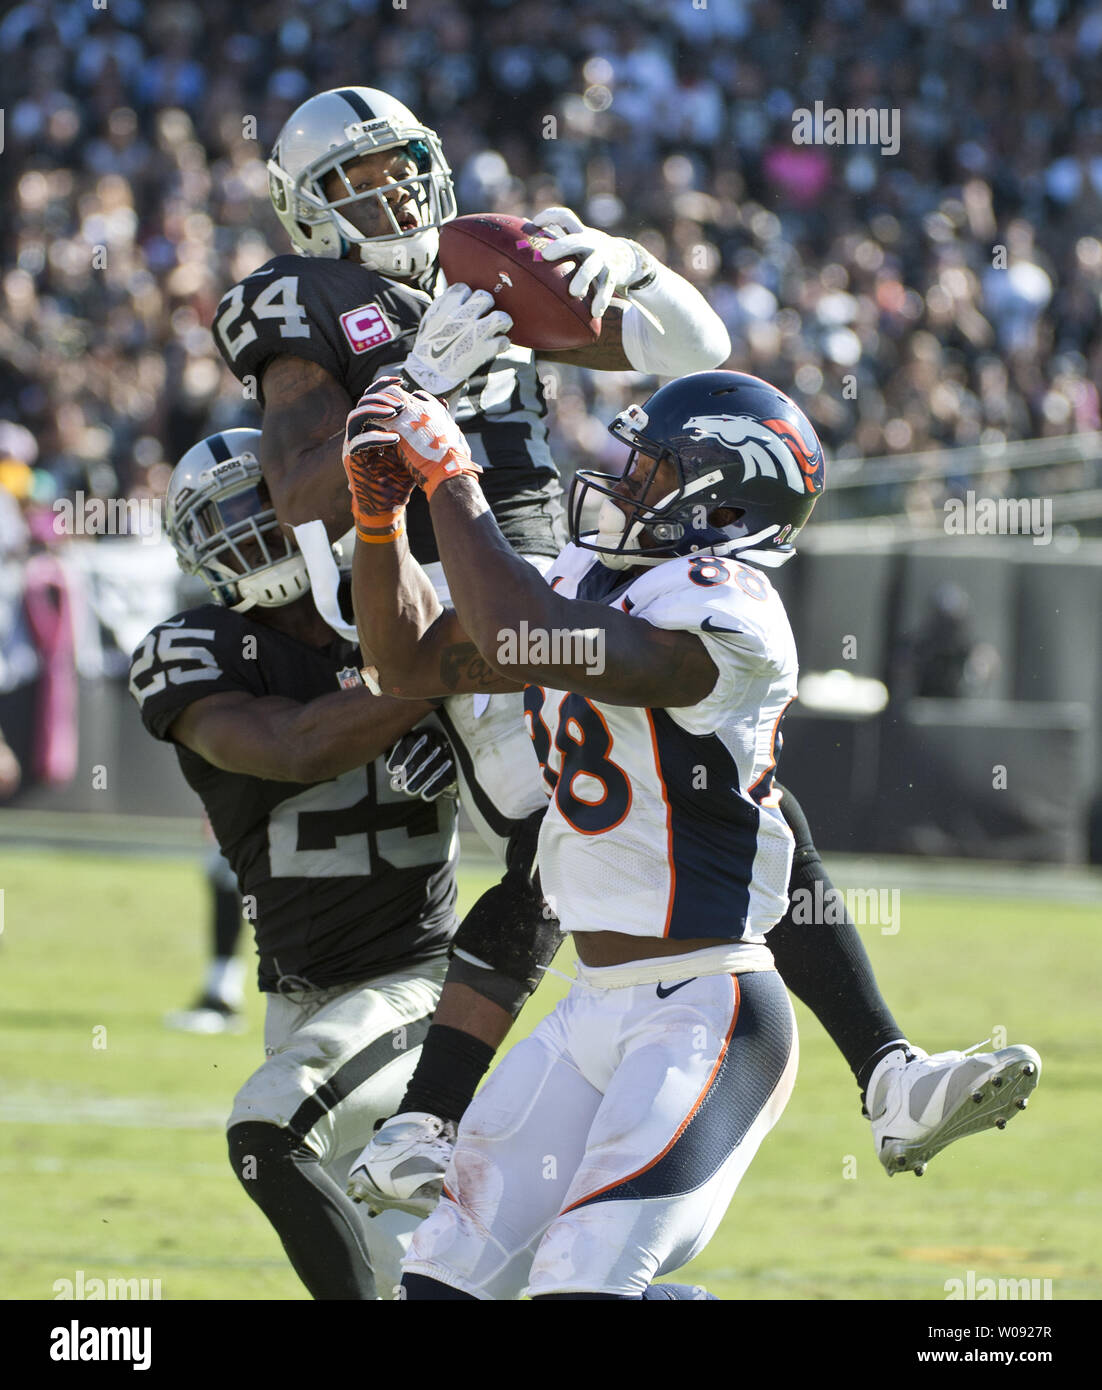 Oakland Raiders Charles Woodson (24) goes high to intercept a Denver Broncos Peyton Manning pass intended for Demaryius Thomas in the third quarter at O.co Coliseum in Oakland, California on October 11, 2015. The Broncos defeated the Raiders 16-10.  Photo by Terry Schmitt/UPI Stock Photo